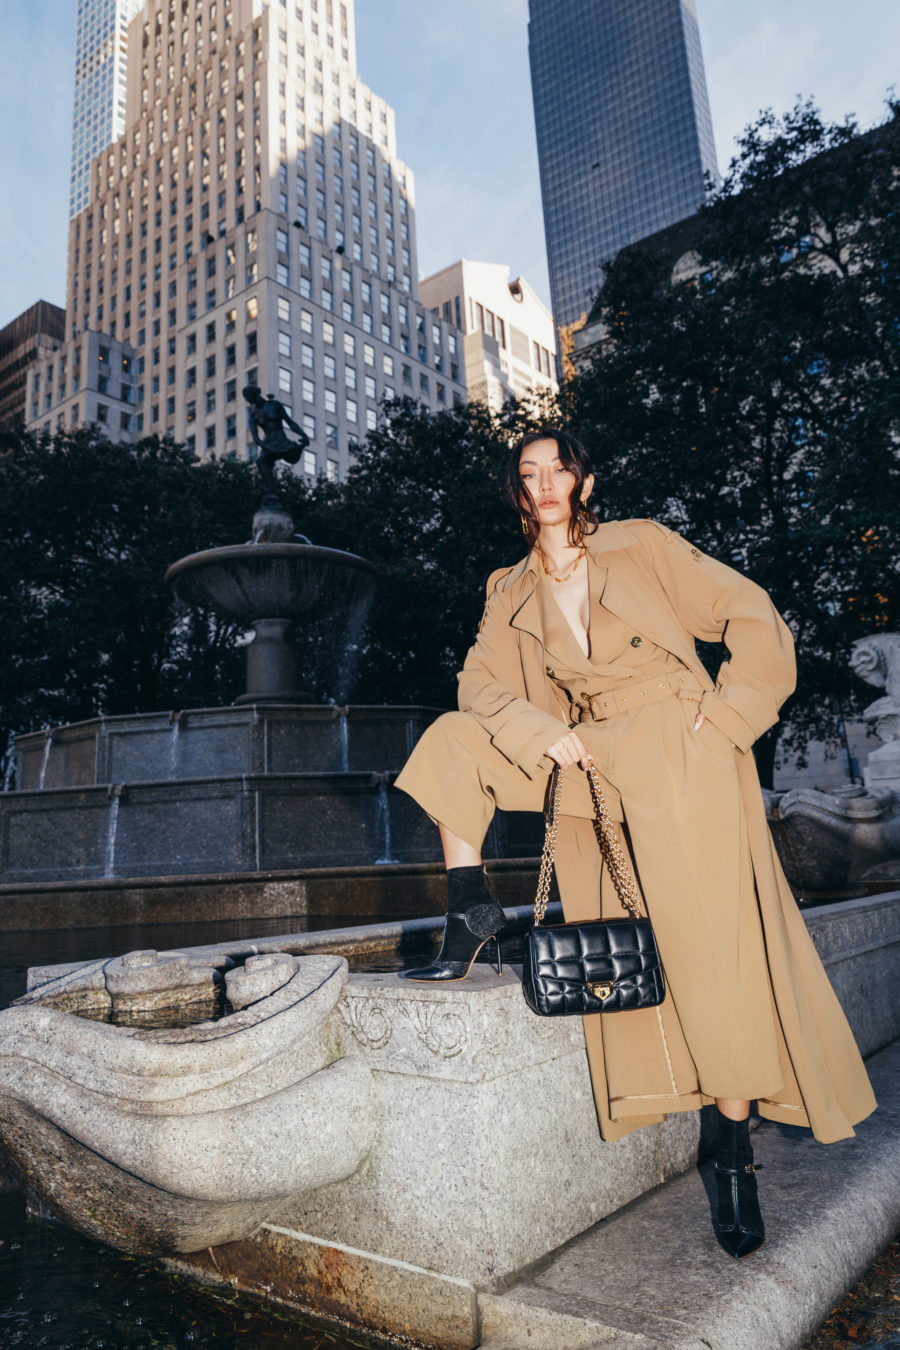 jessica wang wearing michael kors outfit and sharing black friday sales // Jessica Wang - Notjessfashion.com